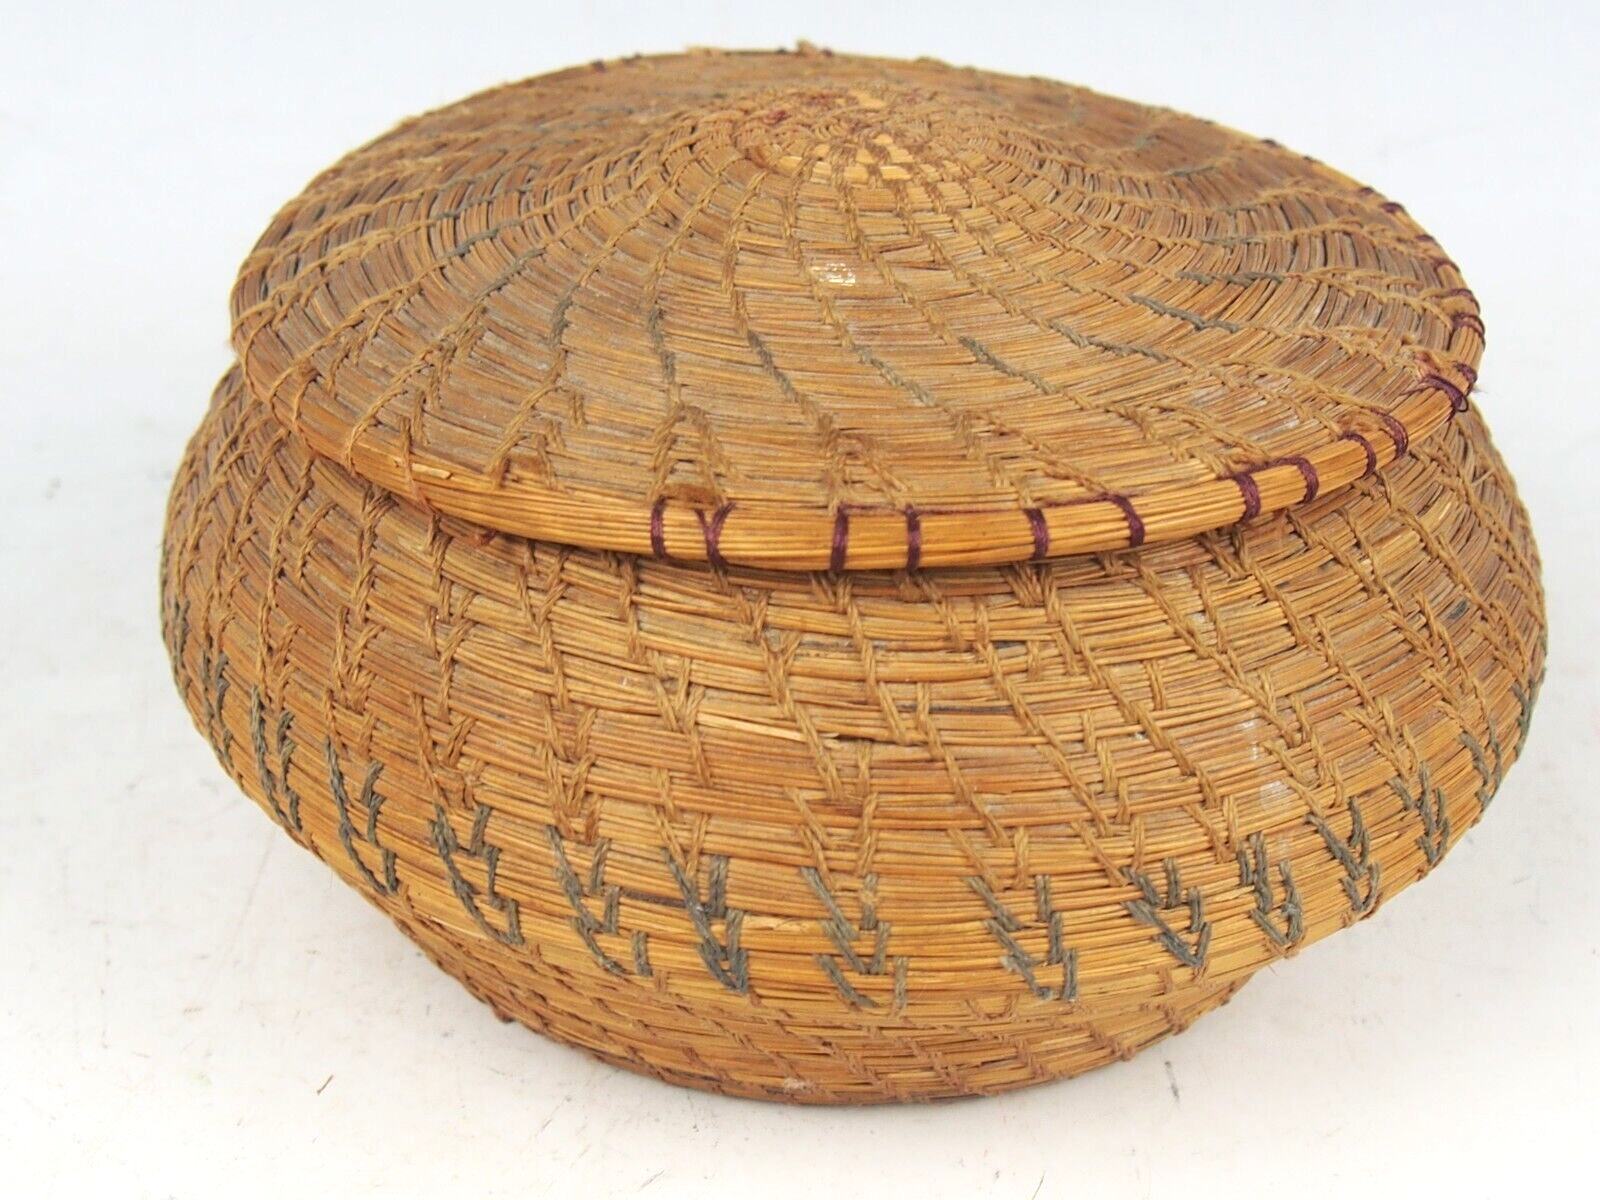 NATIVE AMERICAN HANDWOVEN PINE NEEDLE Coil BASKET with ATTACHED LID 6” DIAMETER